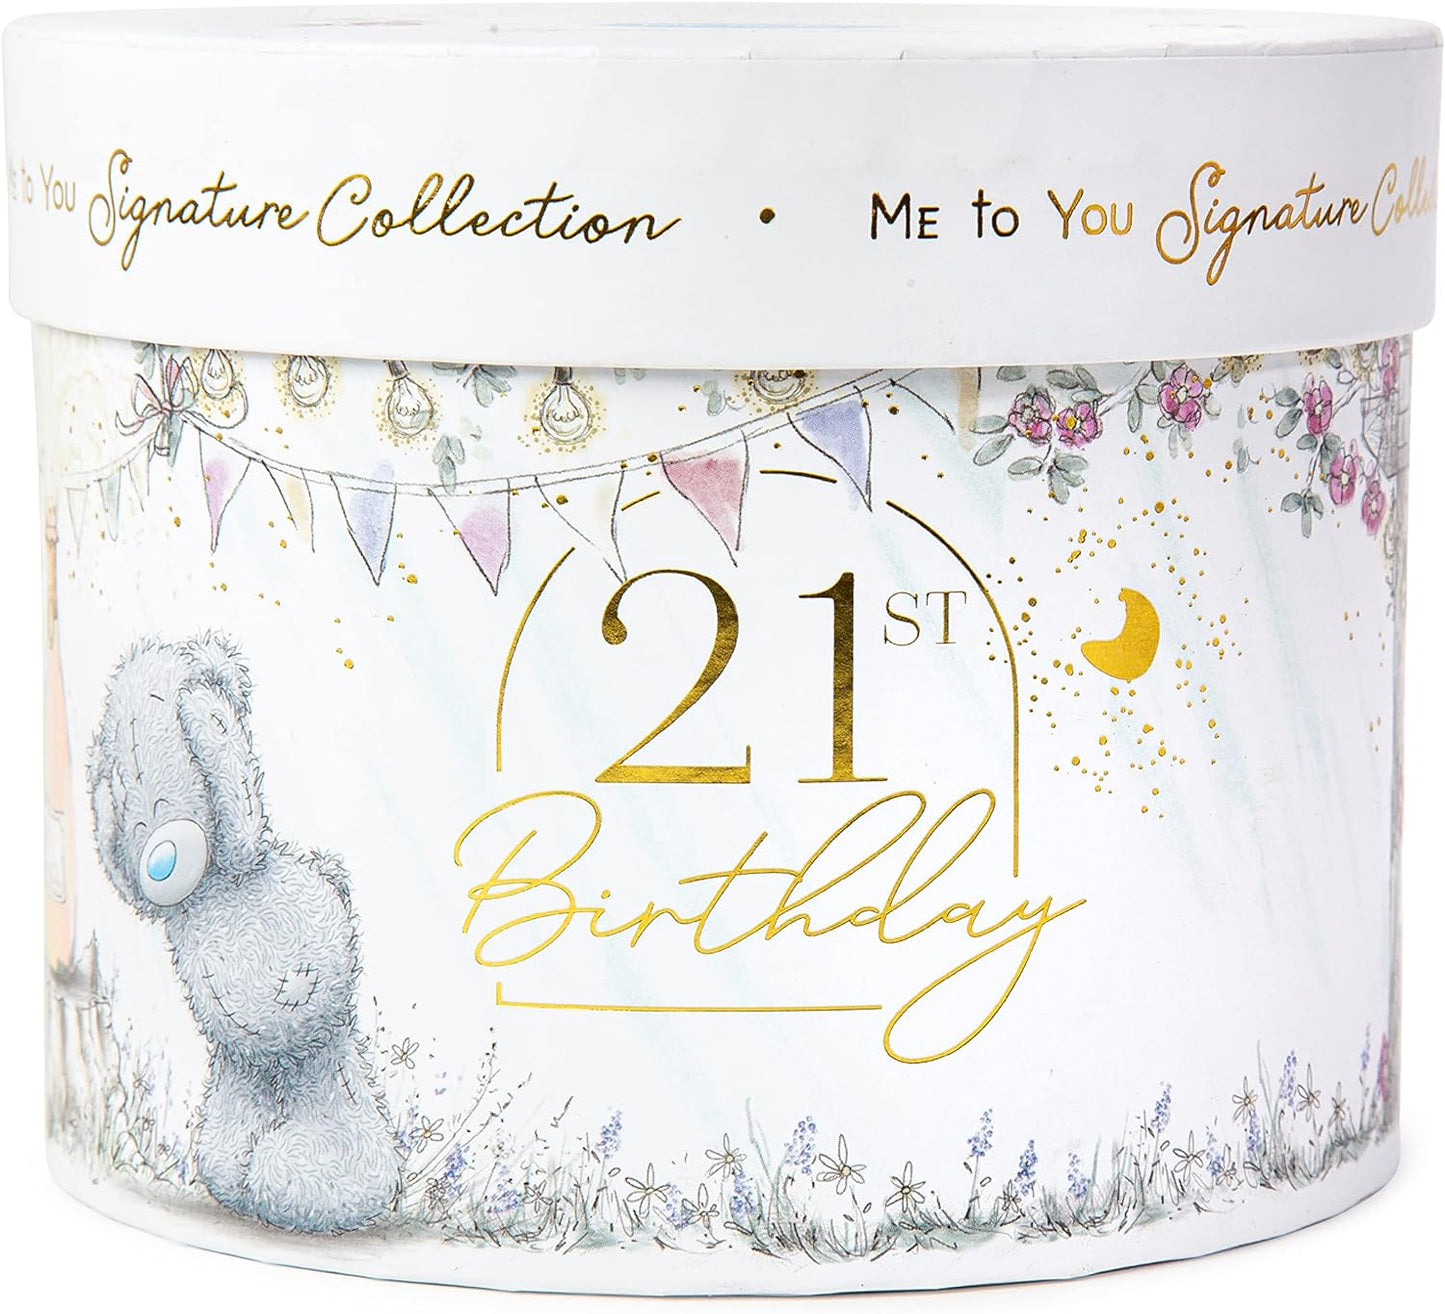 Me to You Tatty Teddy 21st Birthday Mug in a Gift Box Official Signature Collection